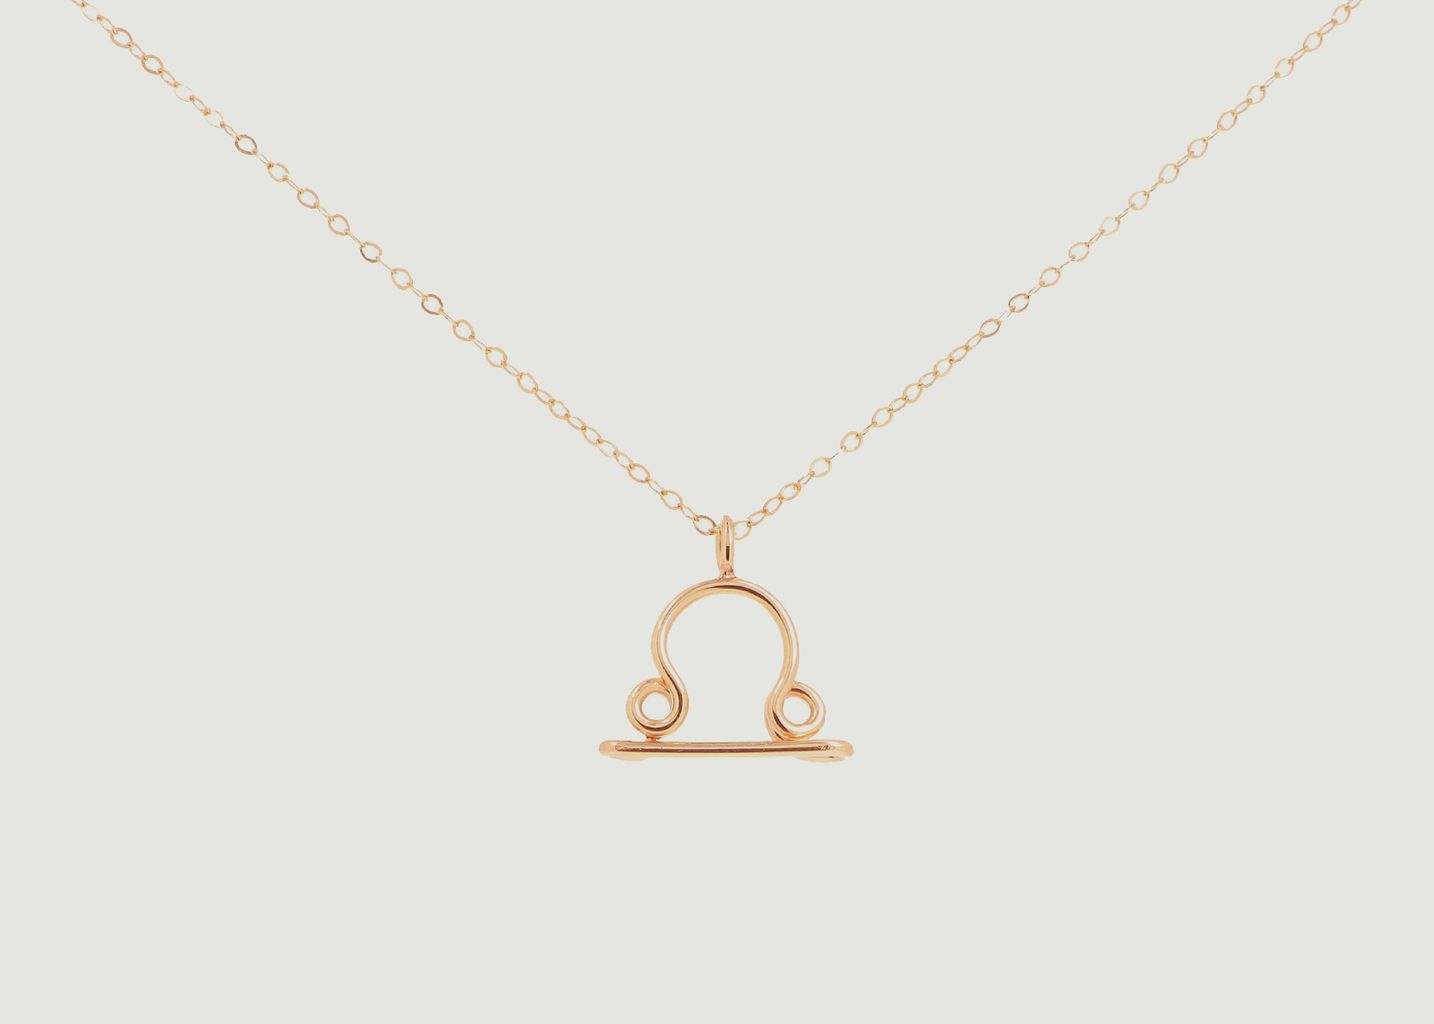 Astro Balance chain necklace with pendant - Atelier Paulin